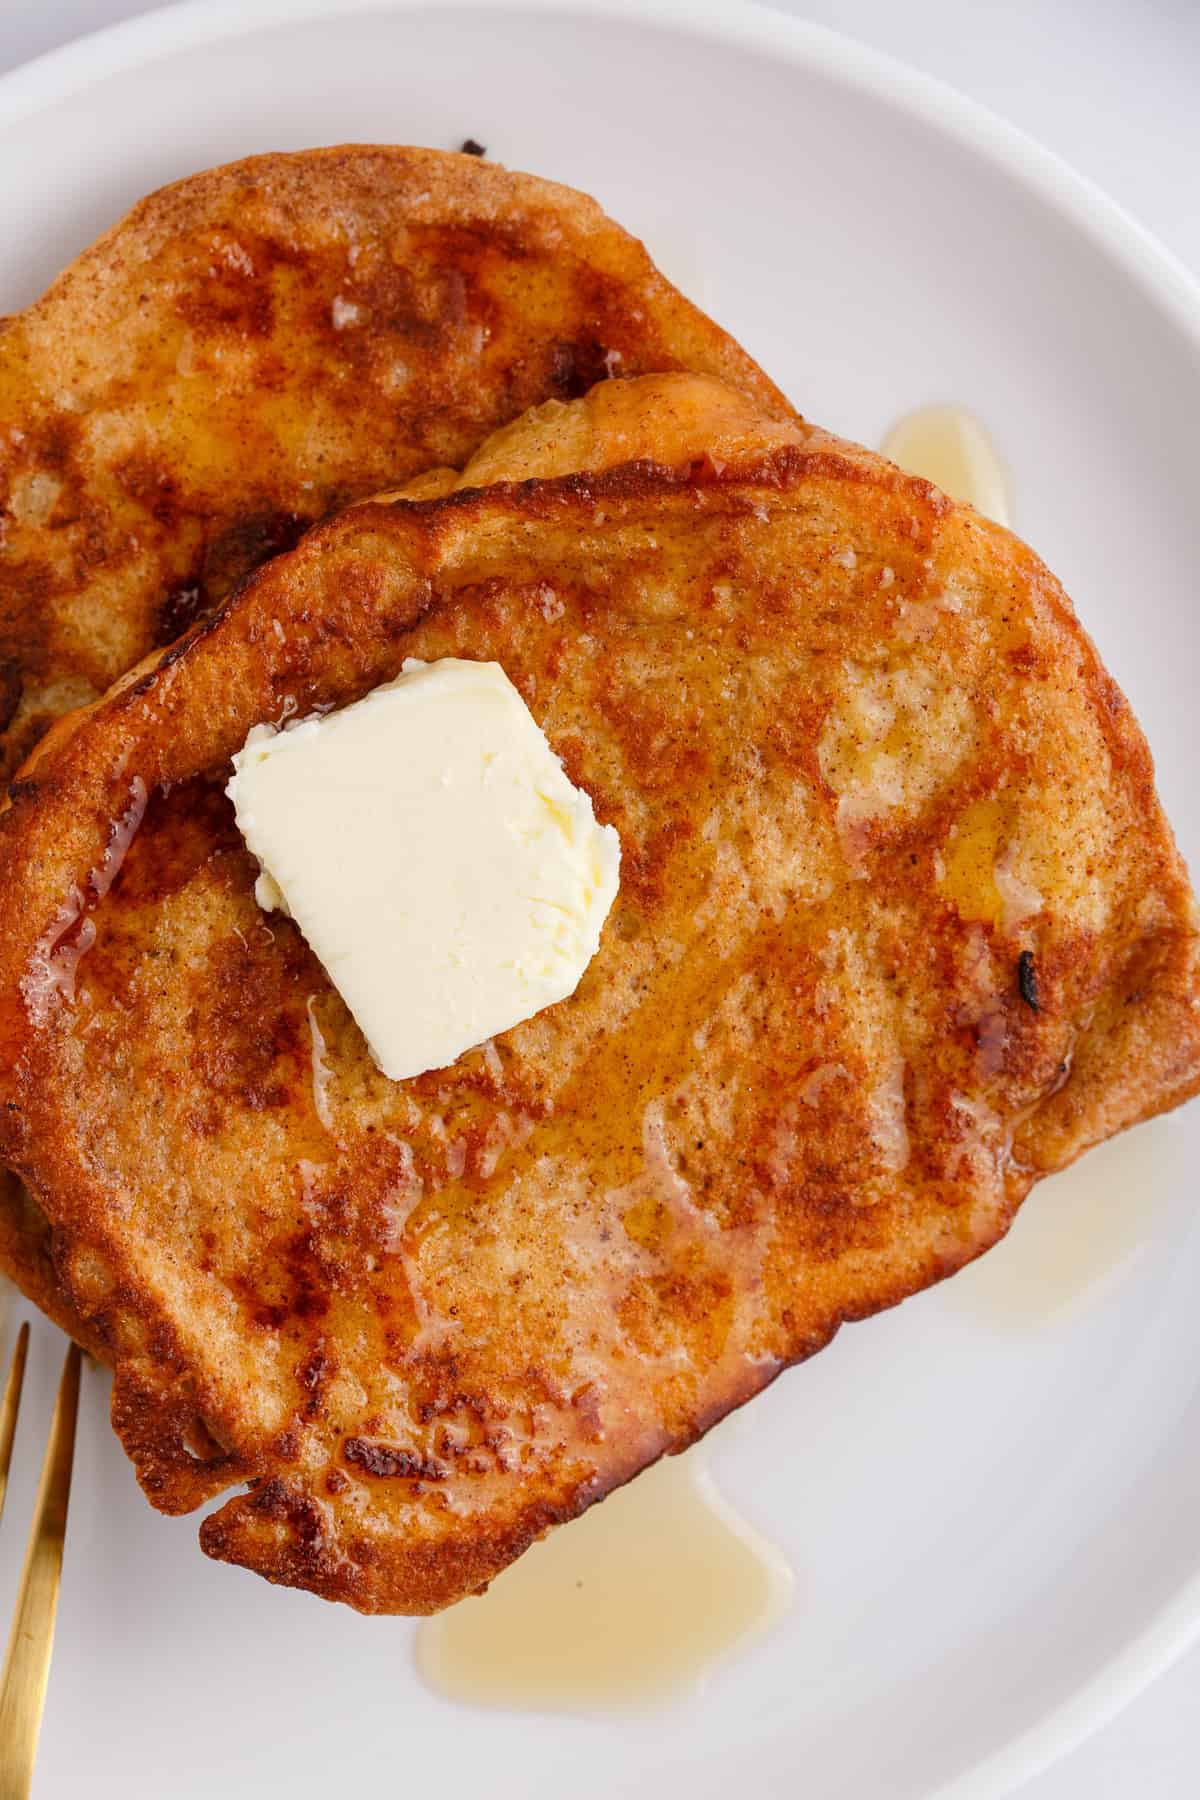 Classic french toast with butter and syrup.